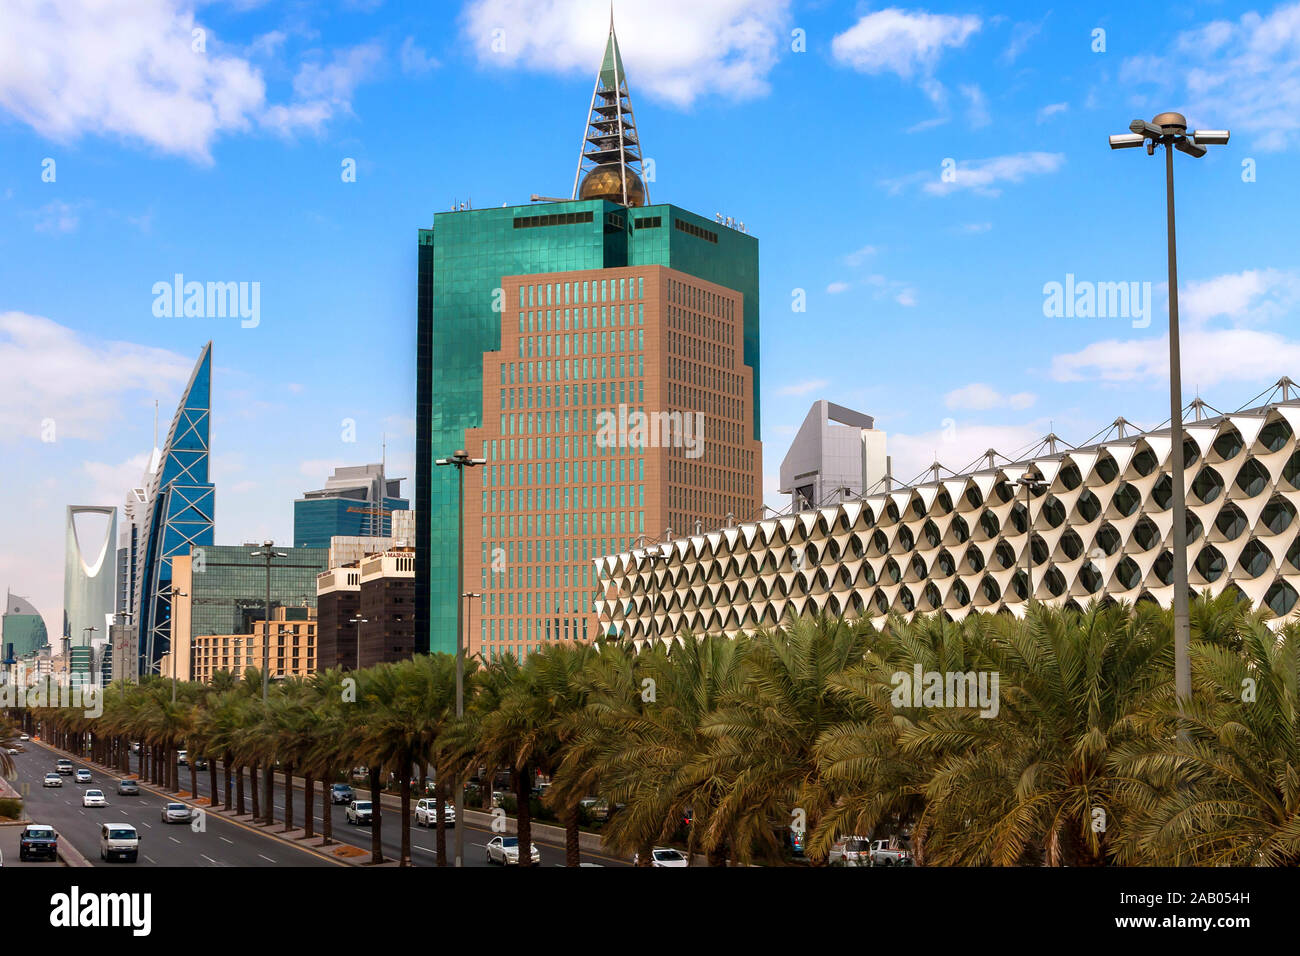 King Fahd Road, King Fahad National Library, and modern architecture in the city downtown, Riyadh Stock Photo